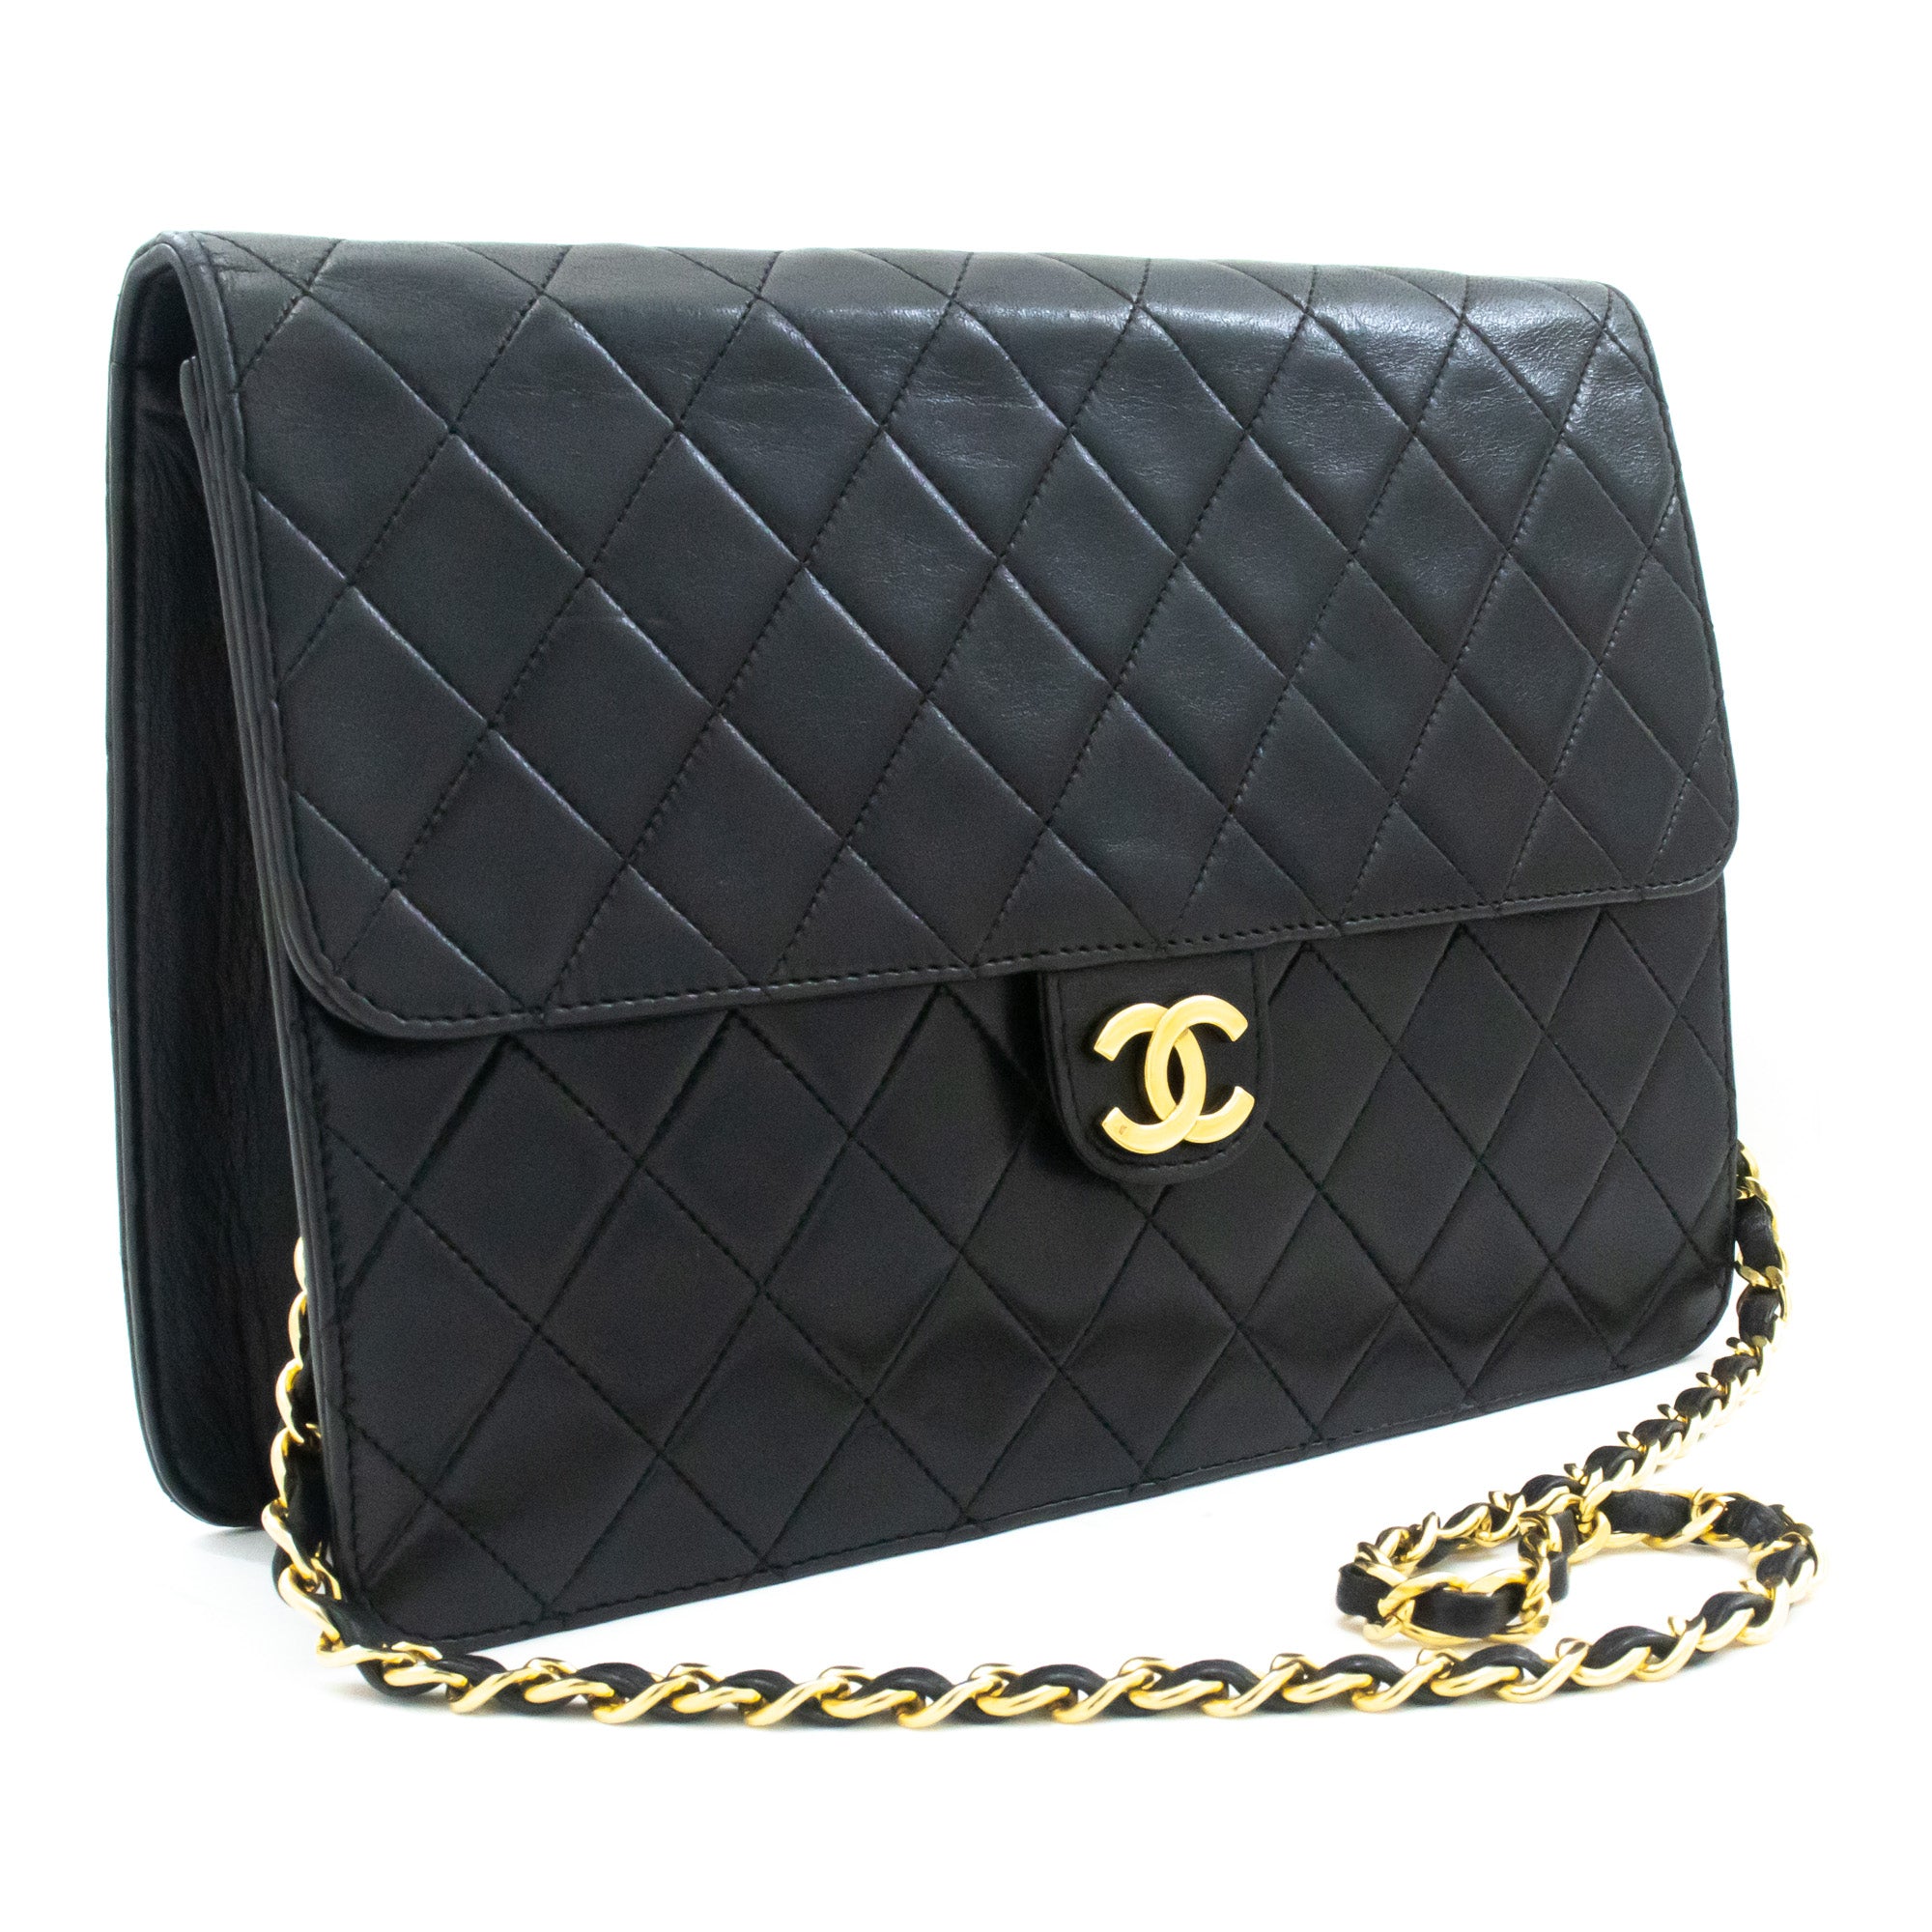 Chanel Chain Shoulder Bag Clutch Black Quilted Flap Lambskin Purse